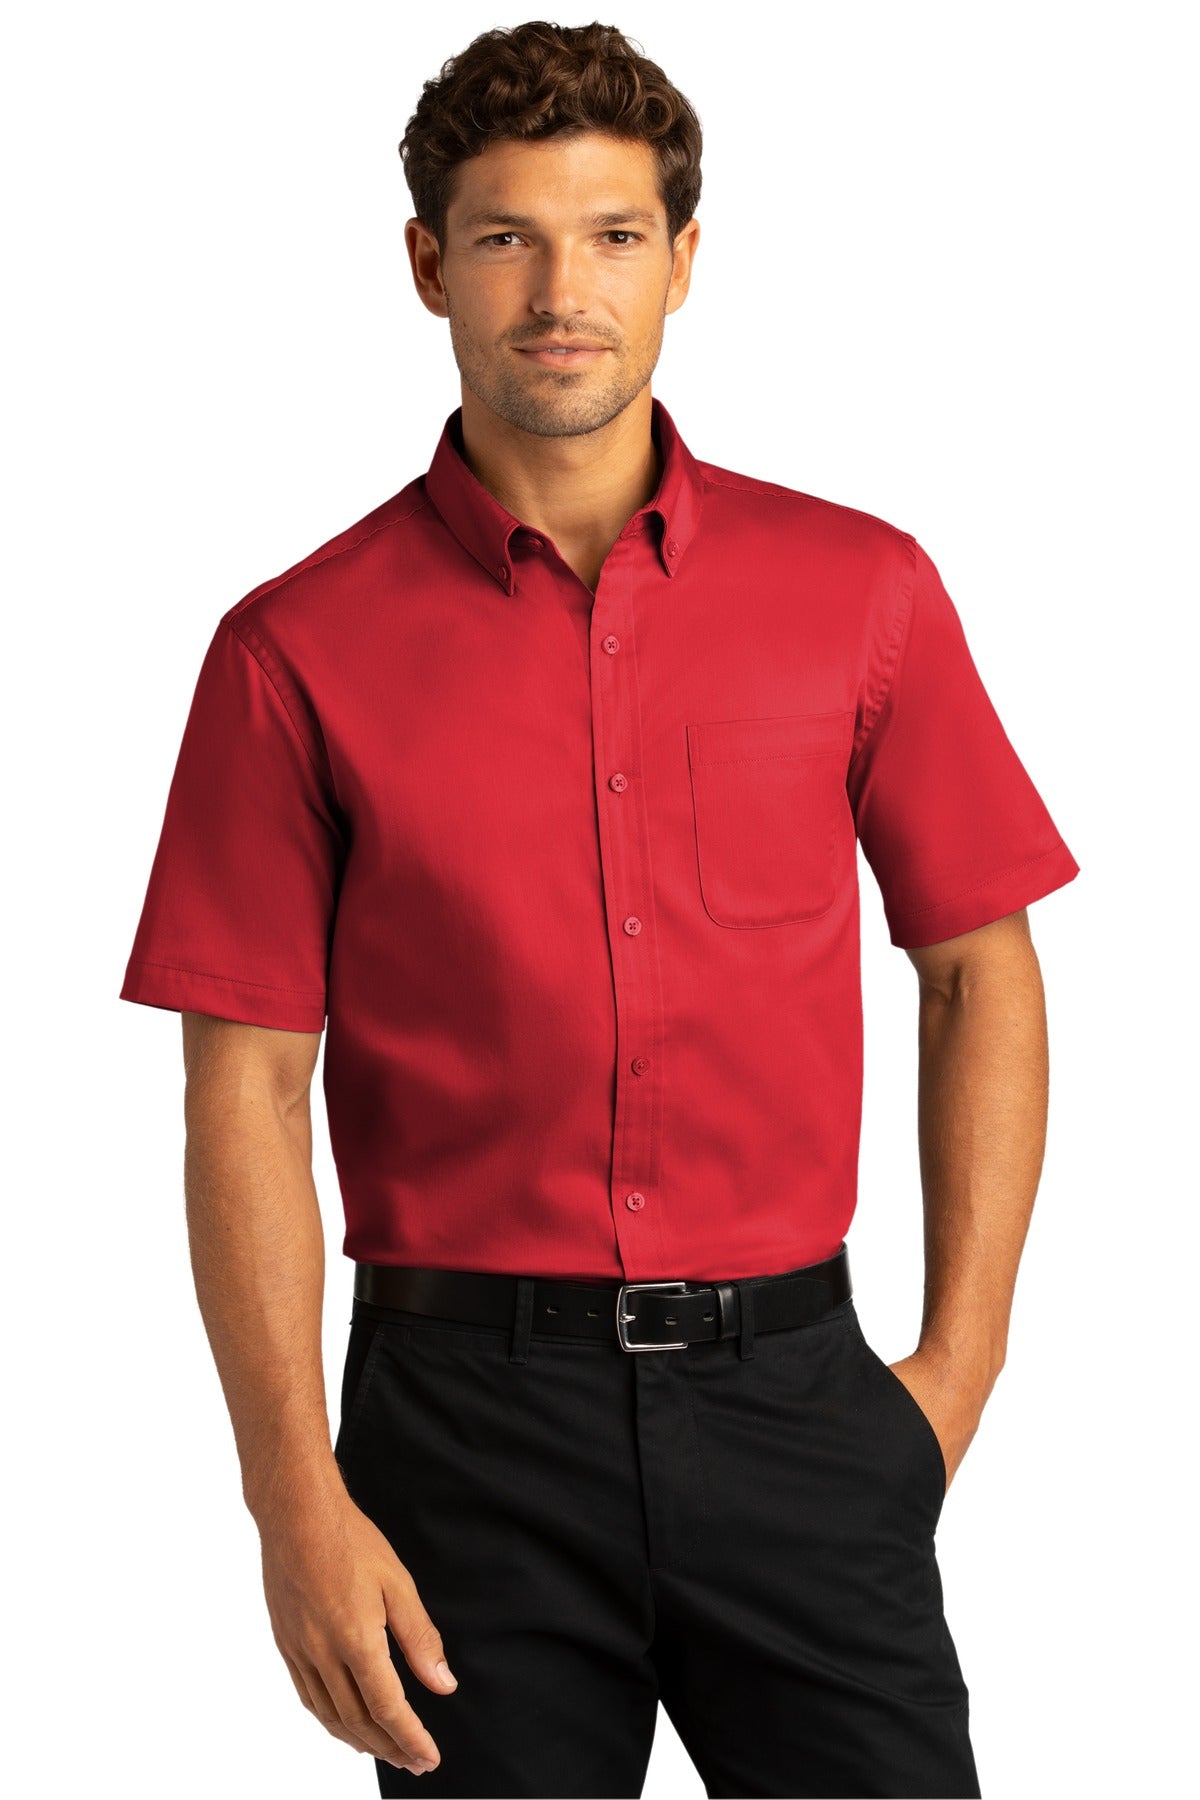 Port Authority® Short Sleeve SuperPro React™ Twill Shirt. W809 [Rich Red] - DFW Impression